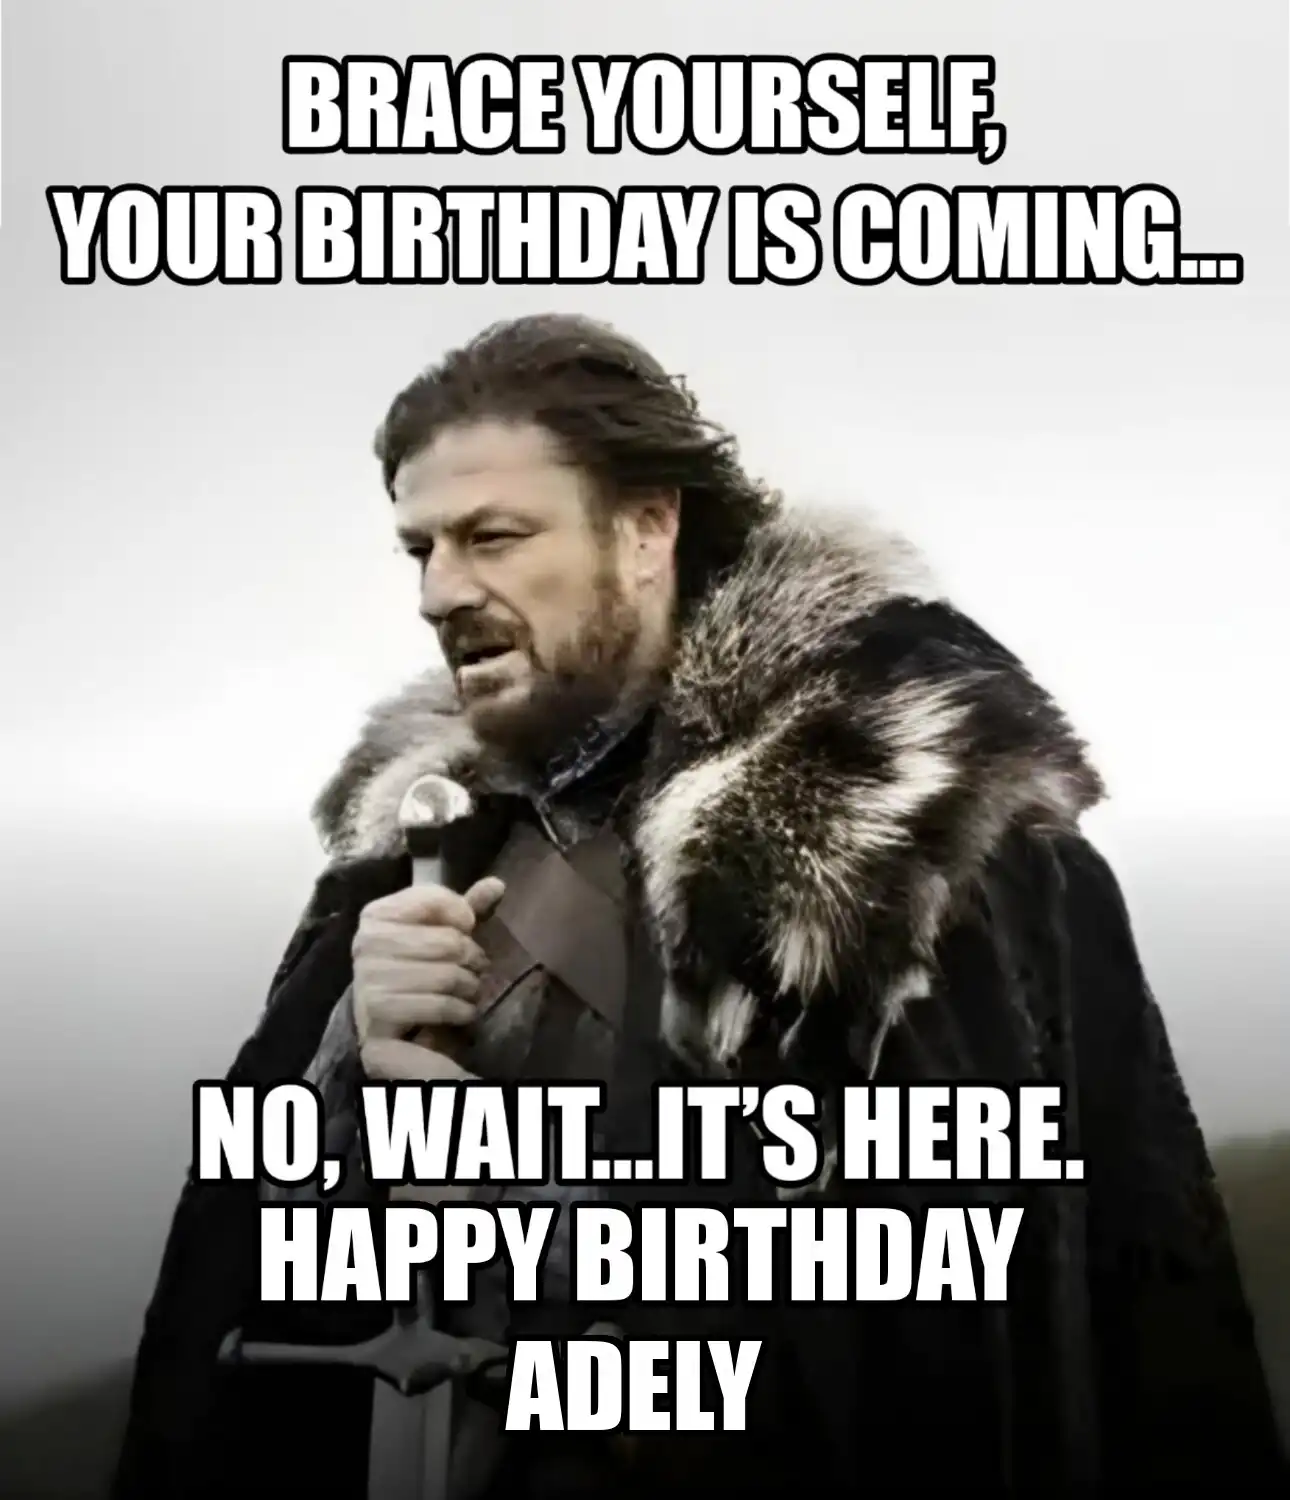 Happy Birthday Adely Brace Yourself Your Birthday Is Coming Meme